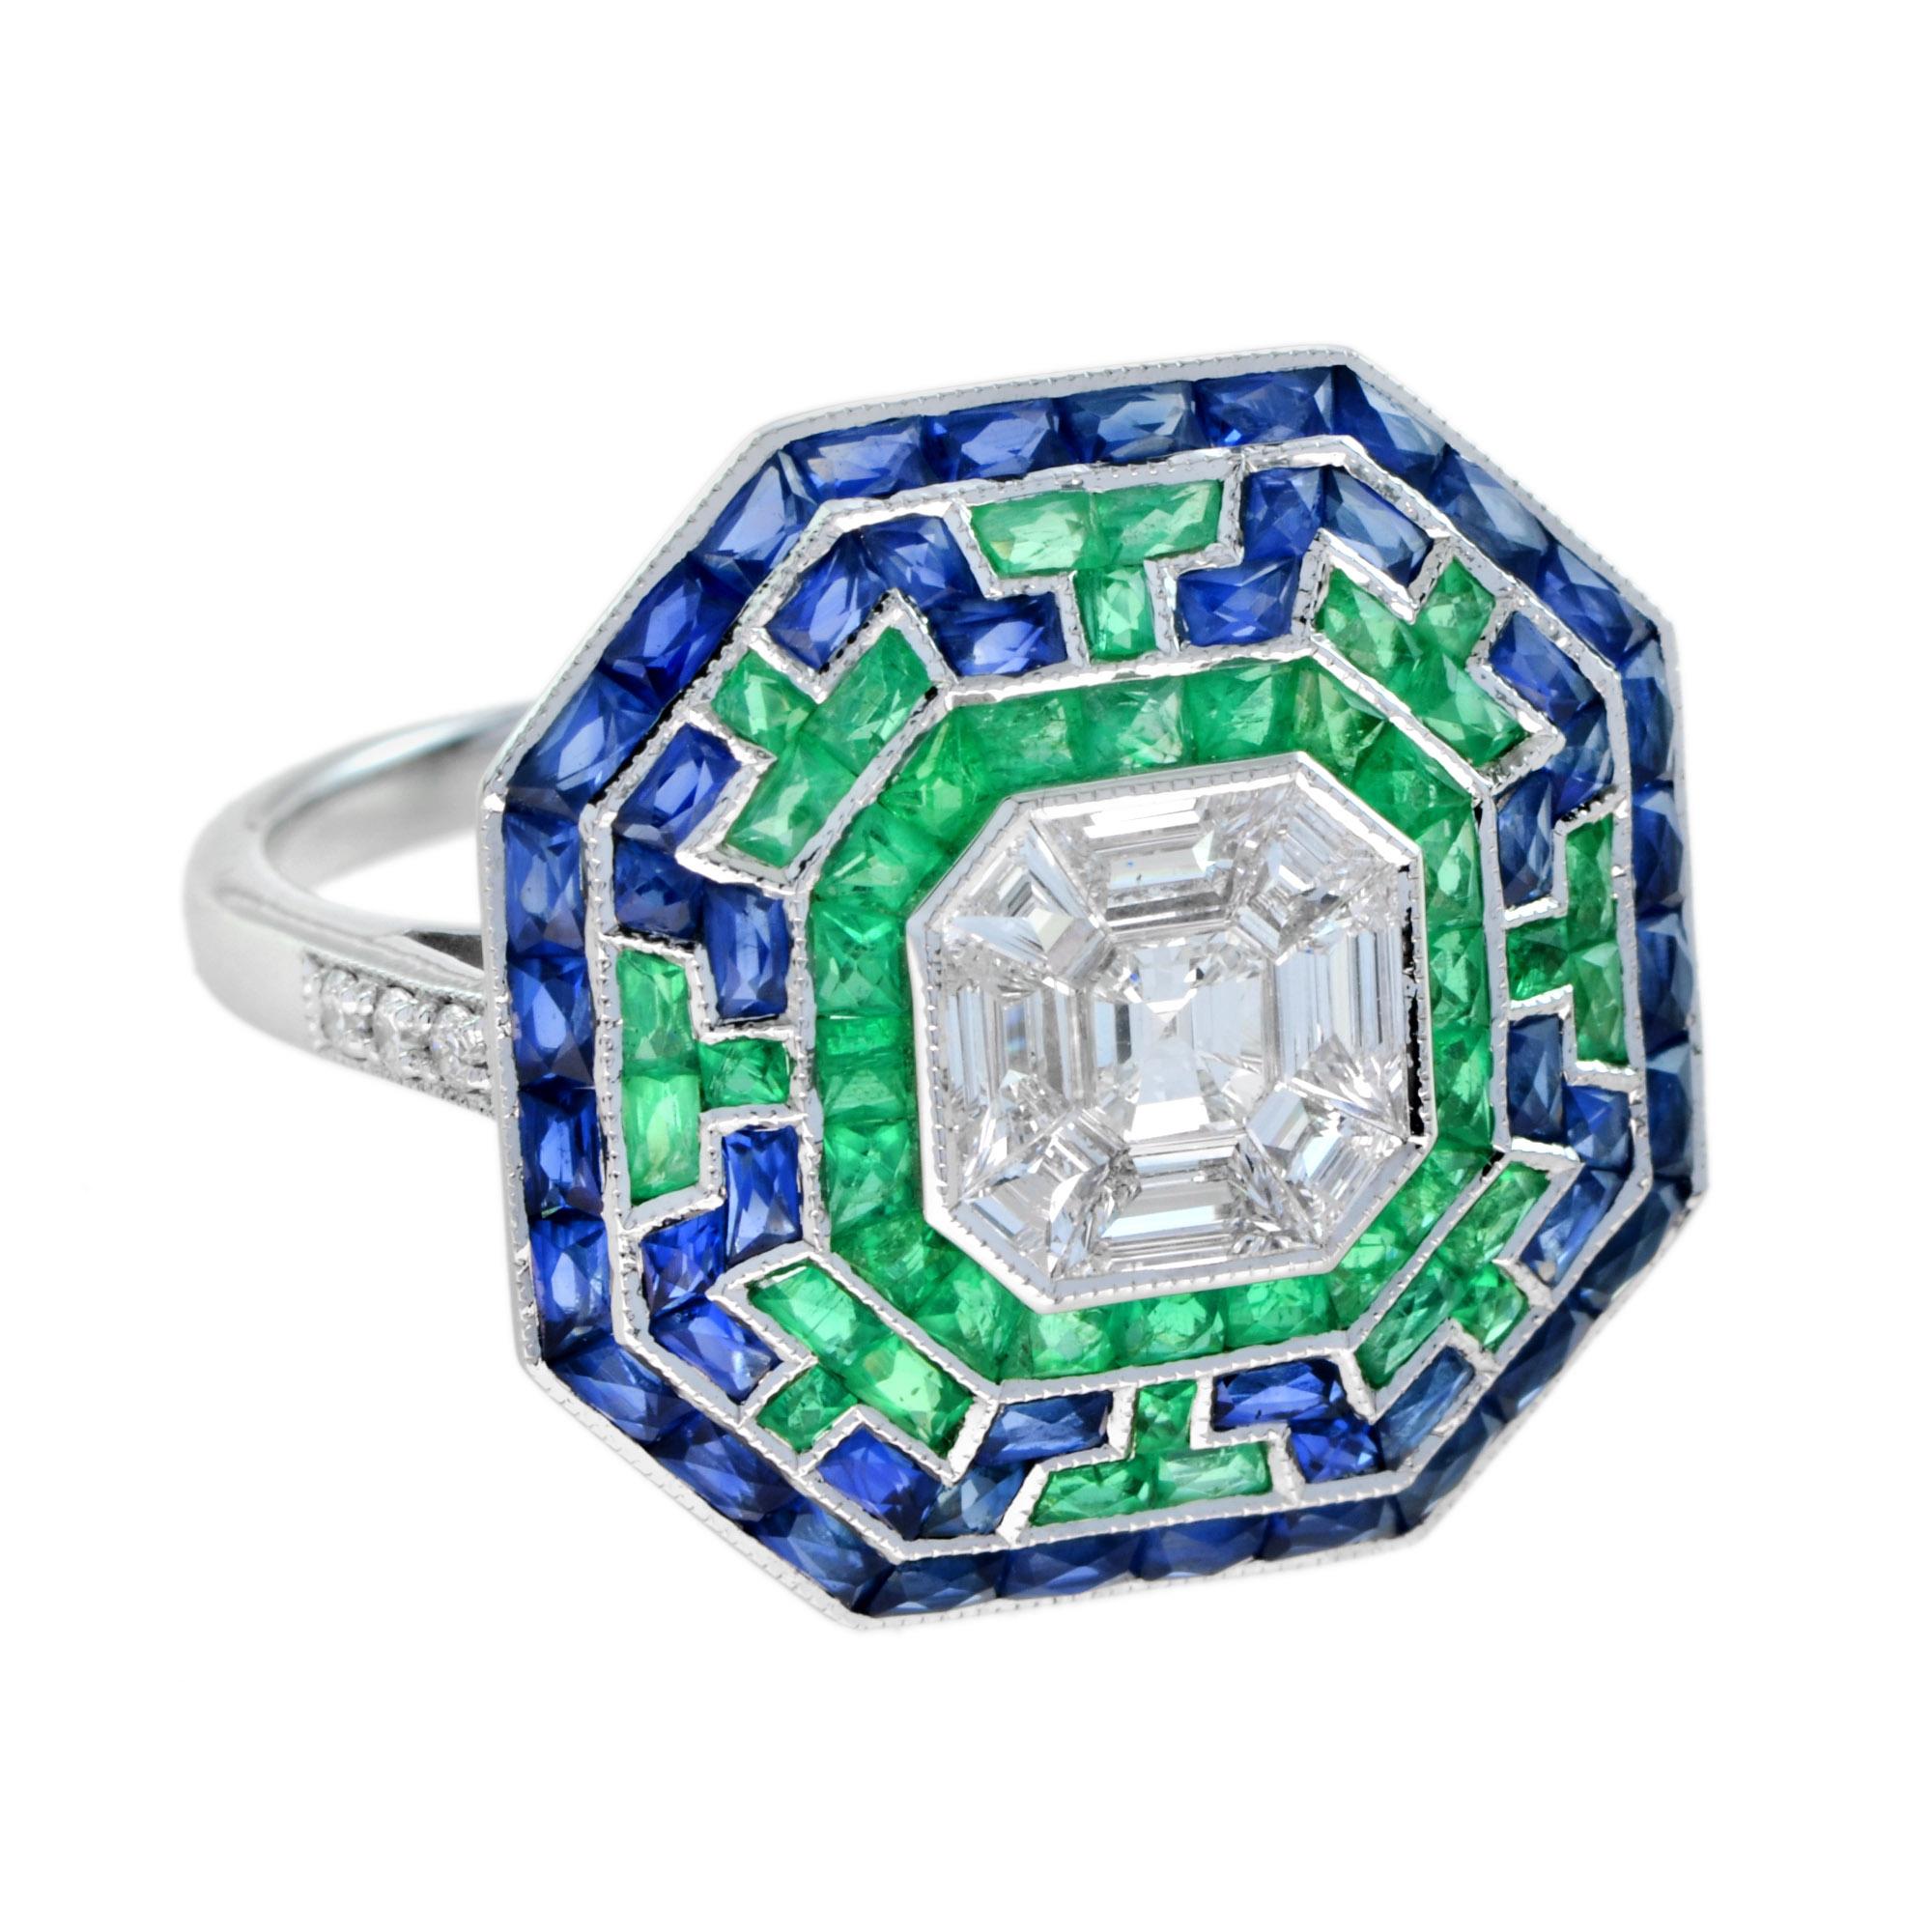 An exquisite Art Deco style octagonal shape ring, crafted in 18k white gold. The ring showcases a precise combination multiple special cut diamonds illusion set in an Asscher shape to create the look of 1.3 – 1.5 carats, surrounded by French cut